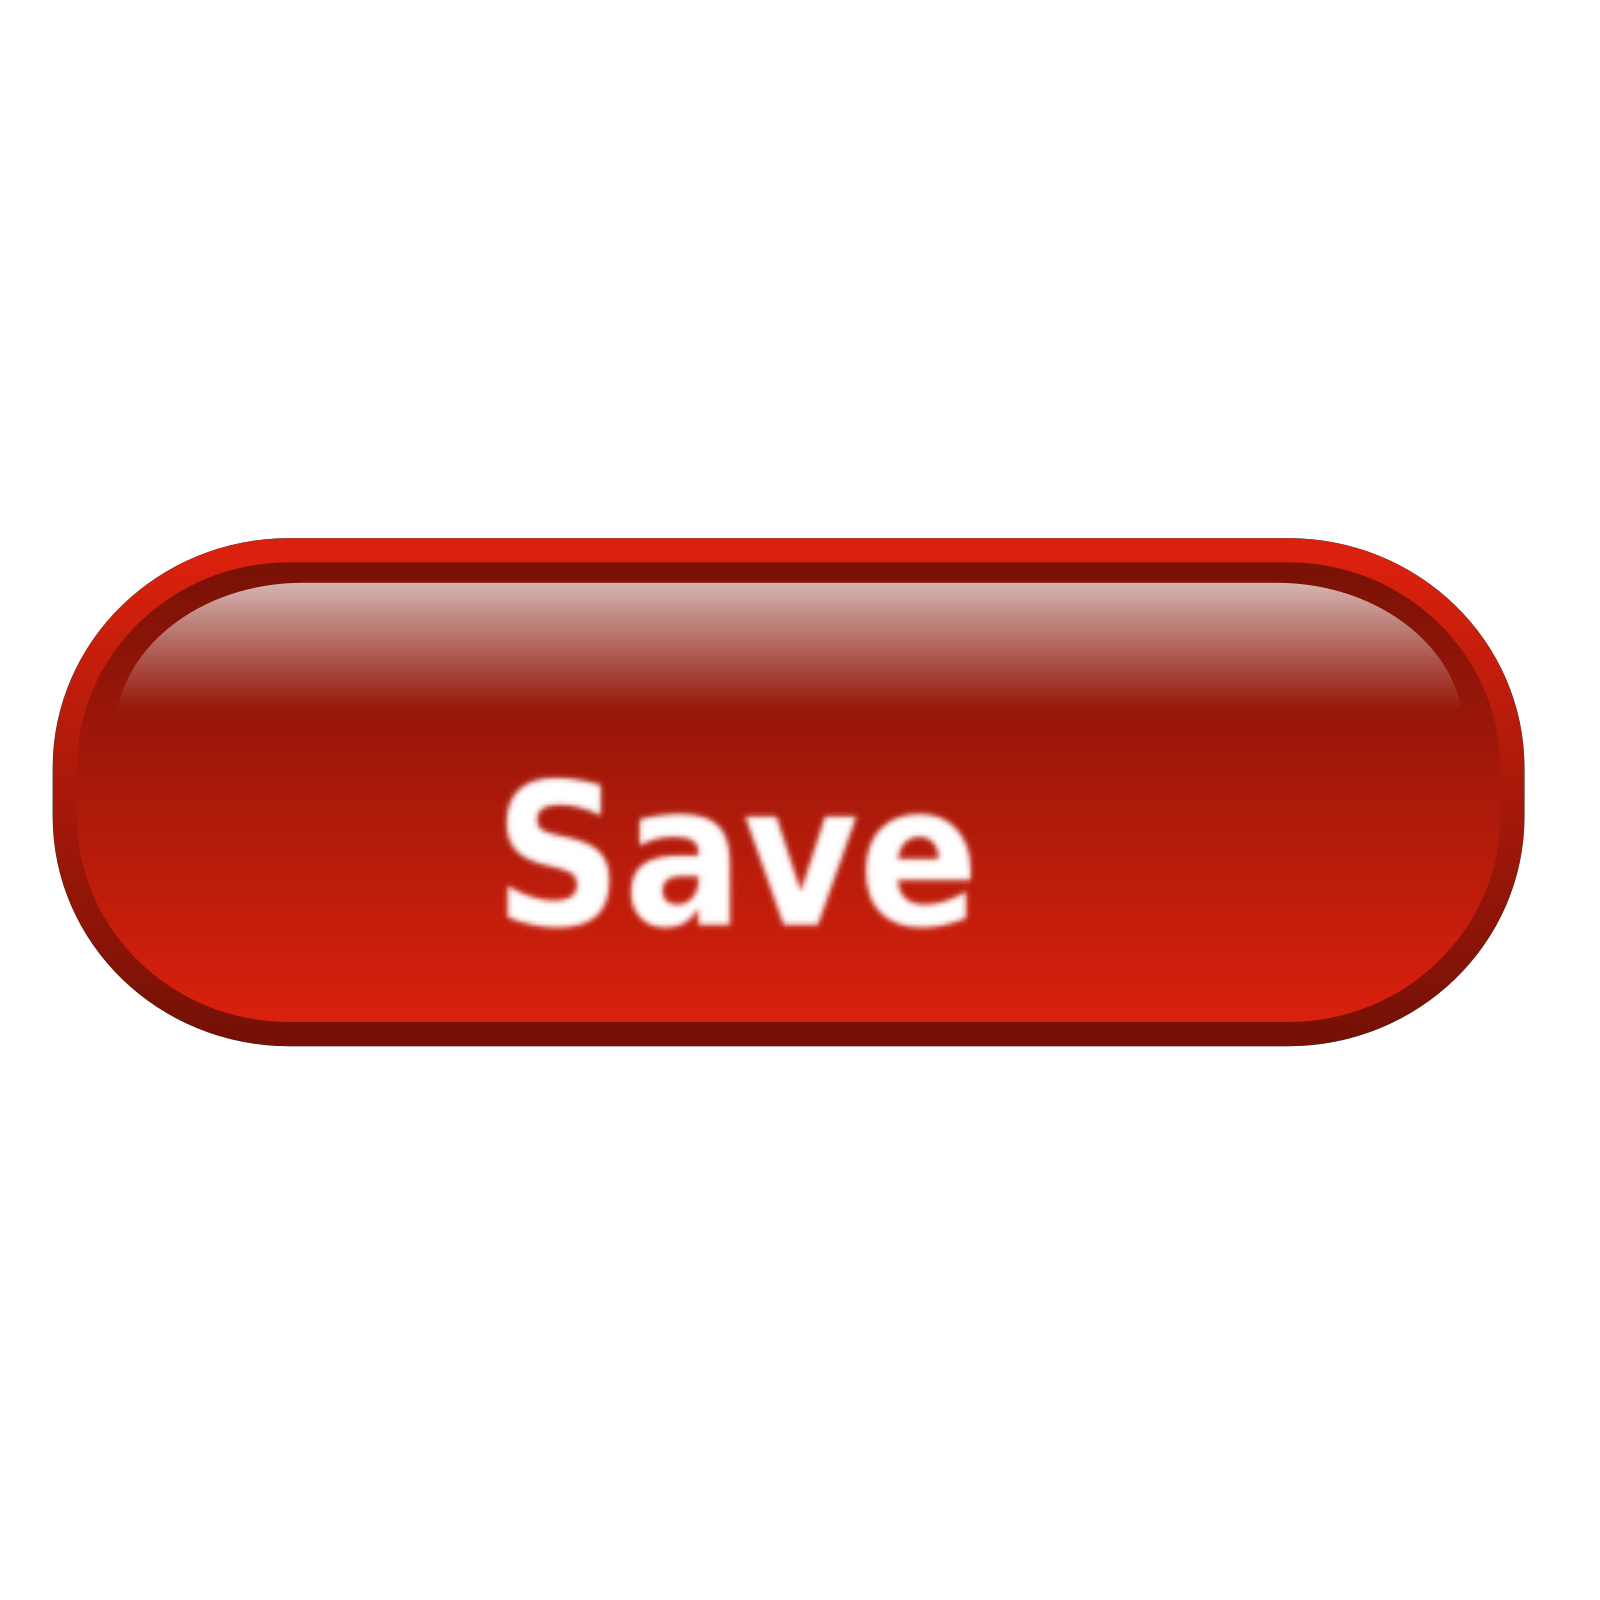 save button image png